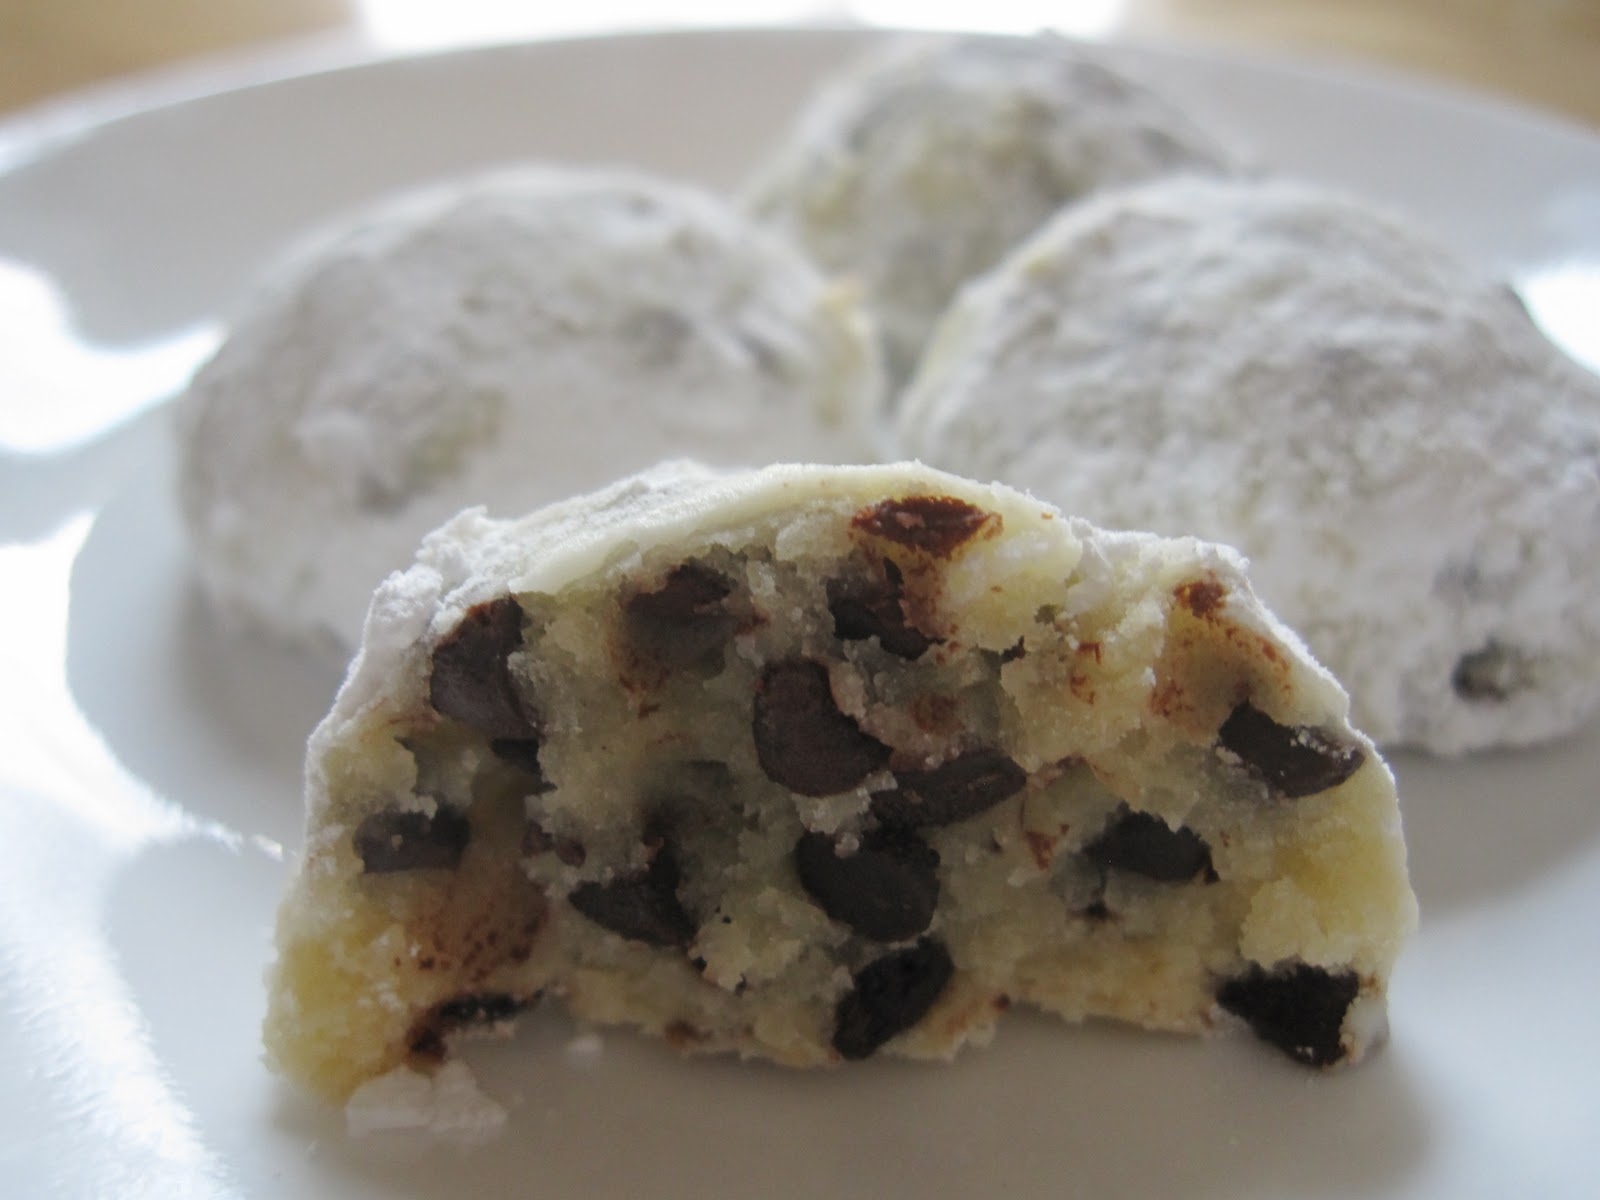 Fanksgiving: Chocolate Chip Snowball's